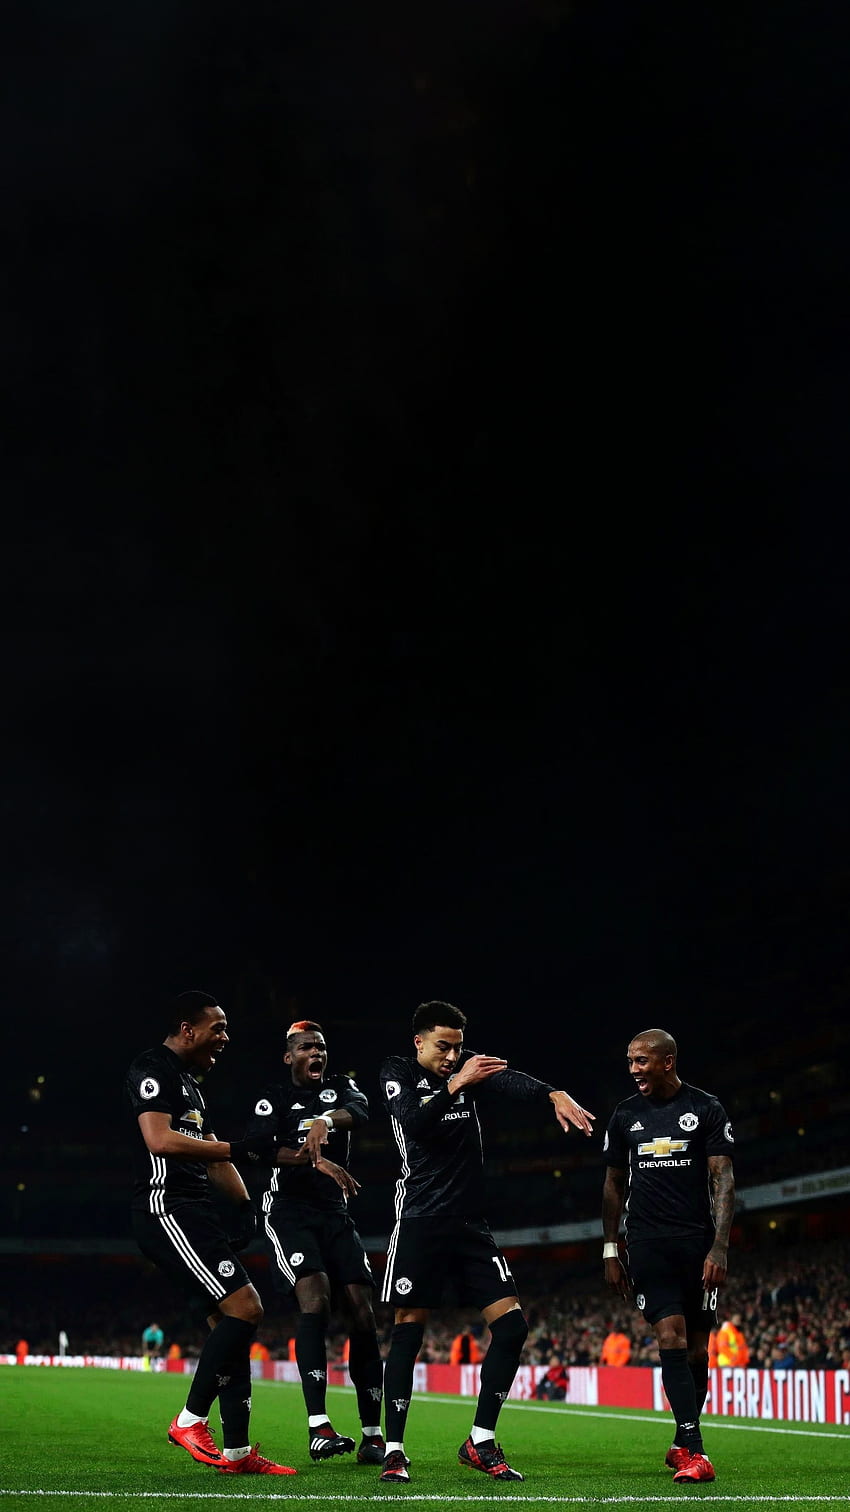 As requested, of Lingard celebrating with Pogba, Young, Jesse Lingard HD phone wallpaper